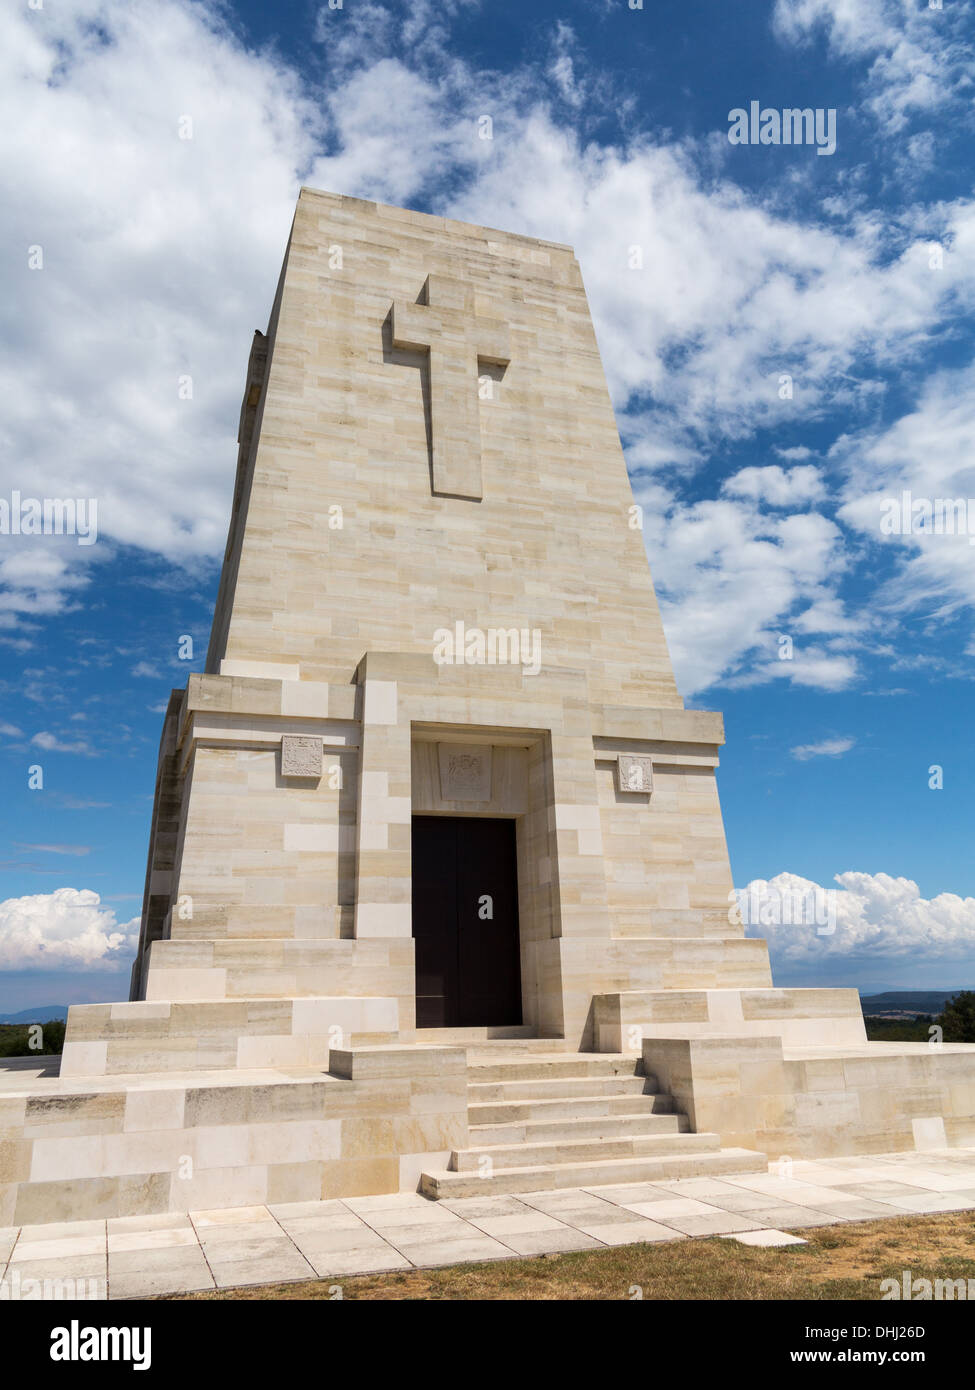 Memorial to the Allied forces, Gallipoli campaign in WW1, Anzac Cove, Turkey at the Lone Pine Cemetery Stock Photo